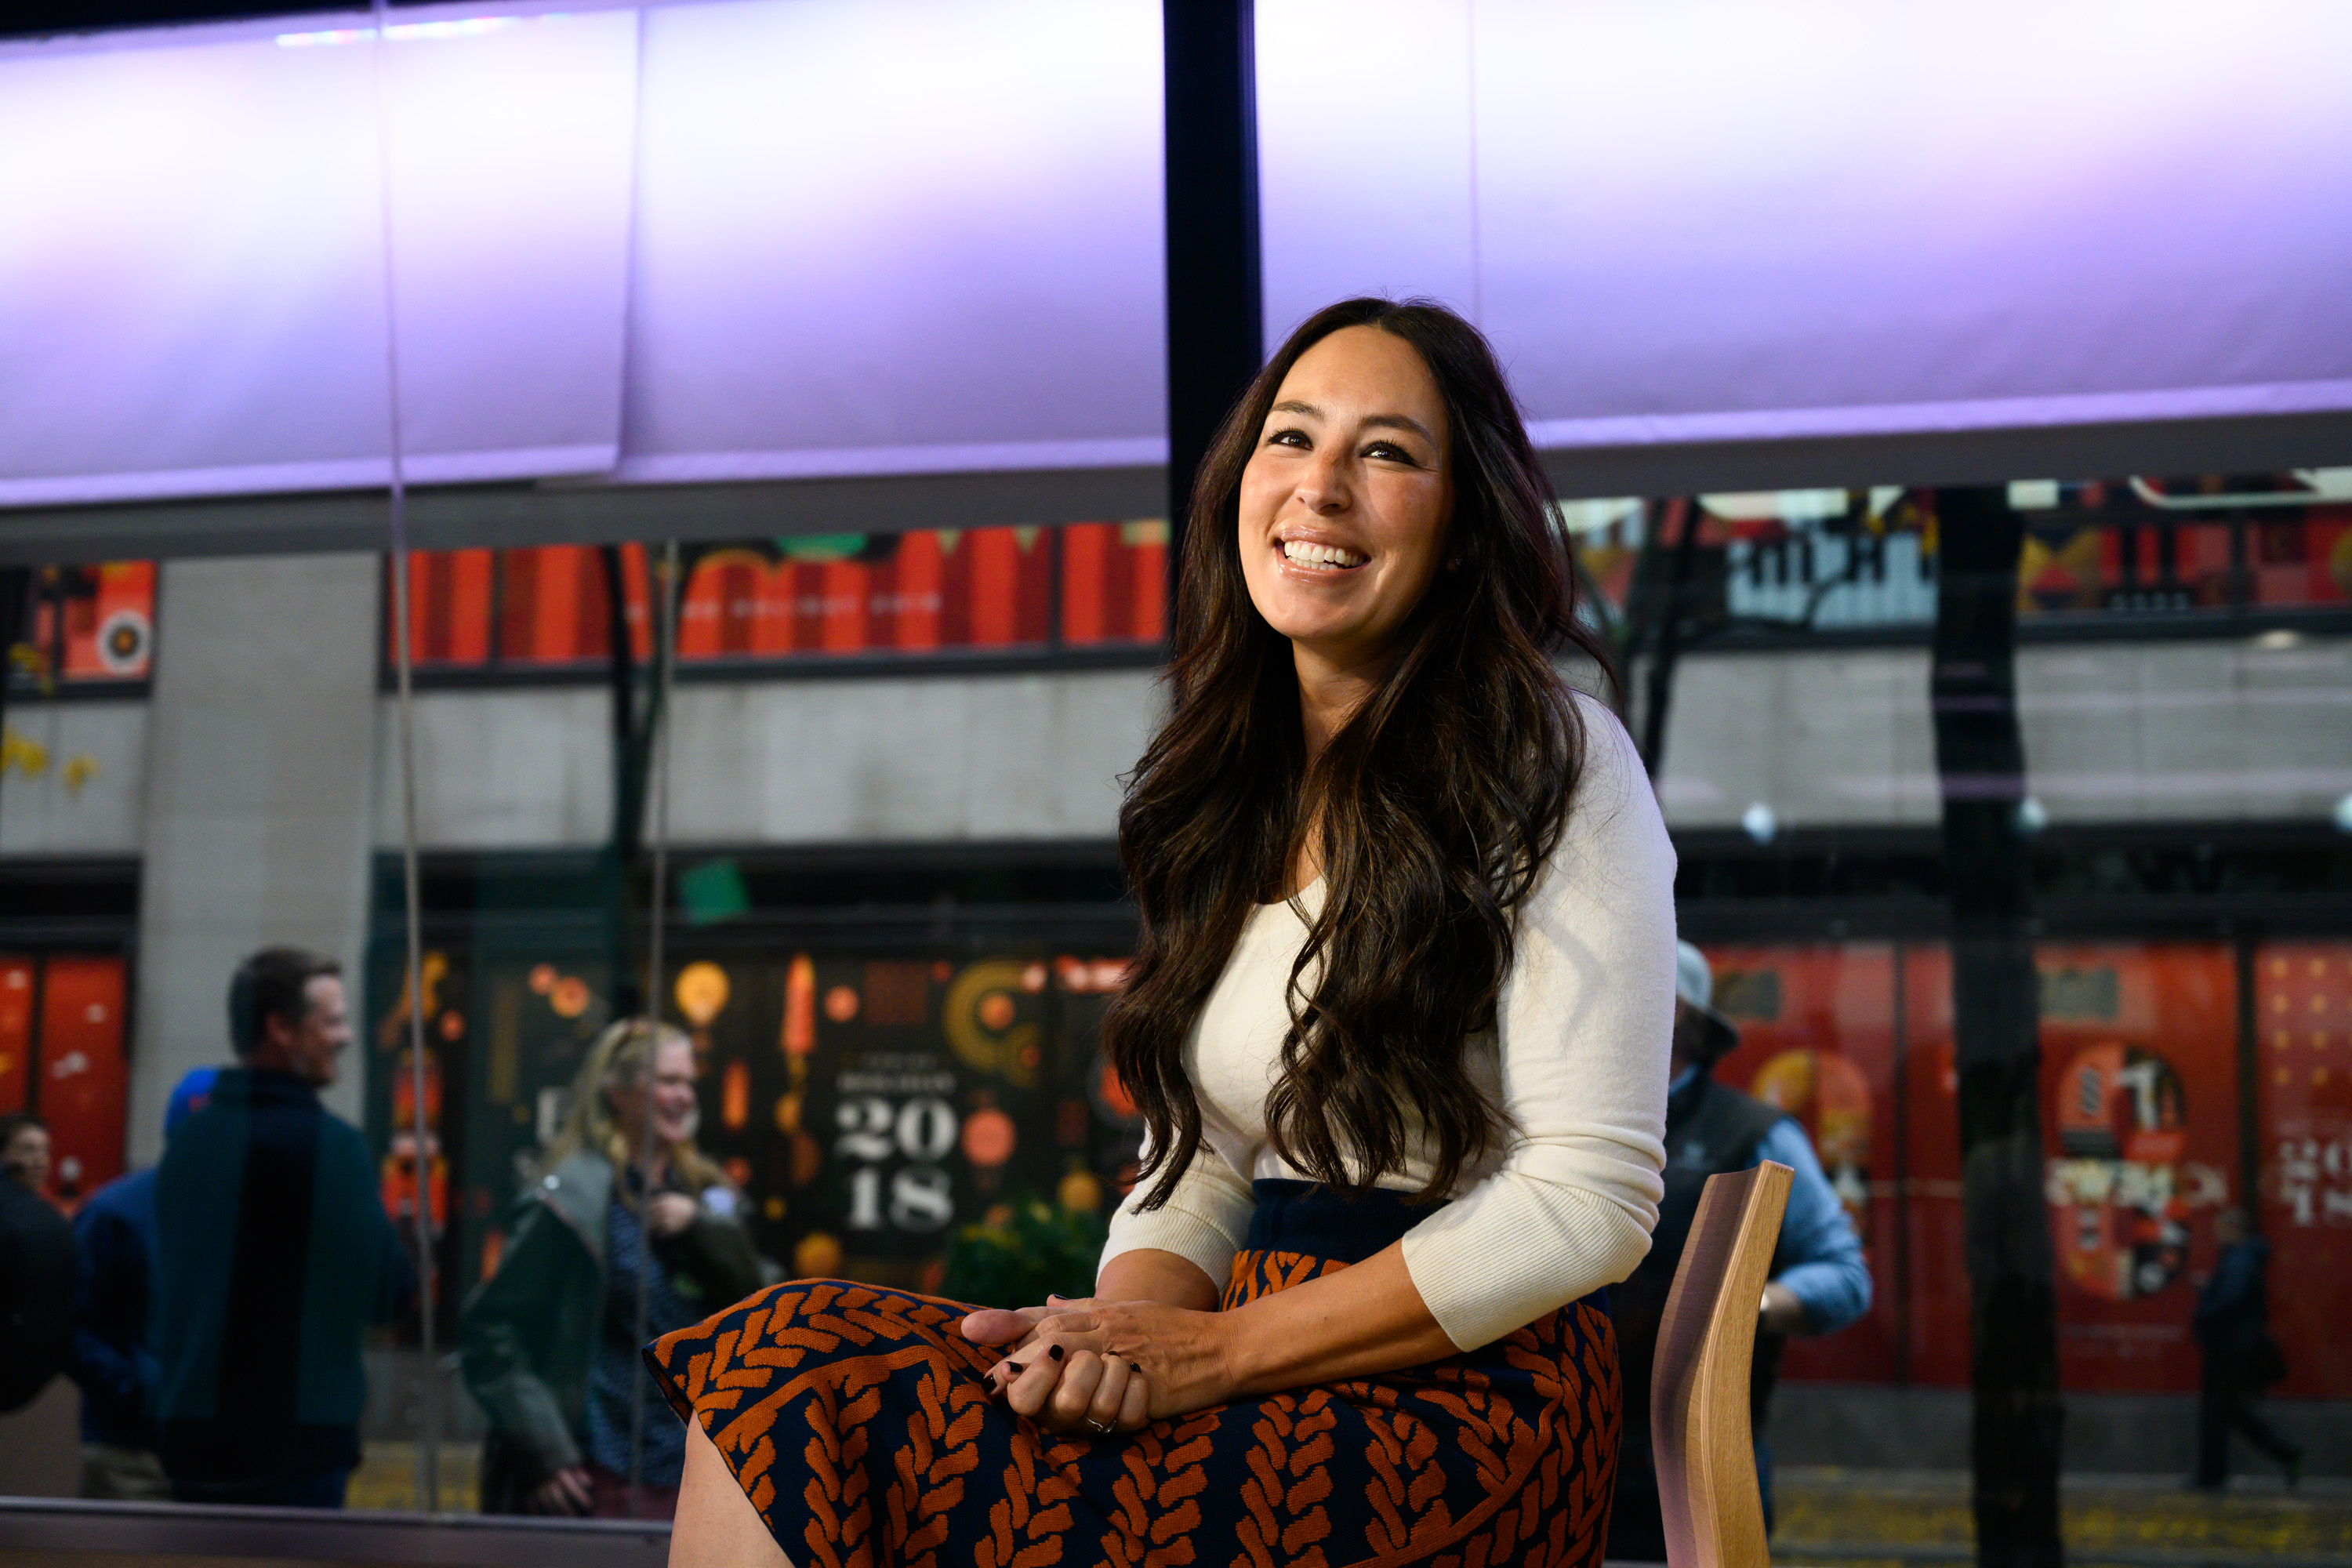 Joanna Gaines on the 'Today' show in 2018